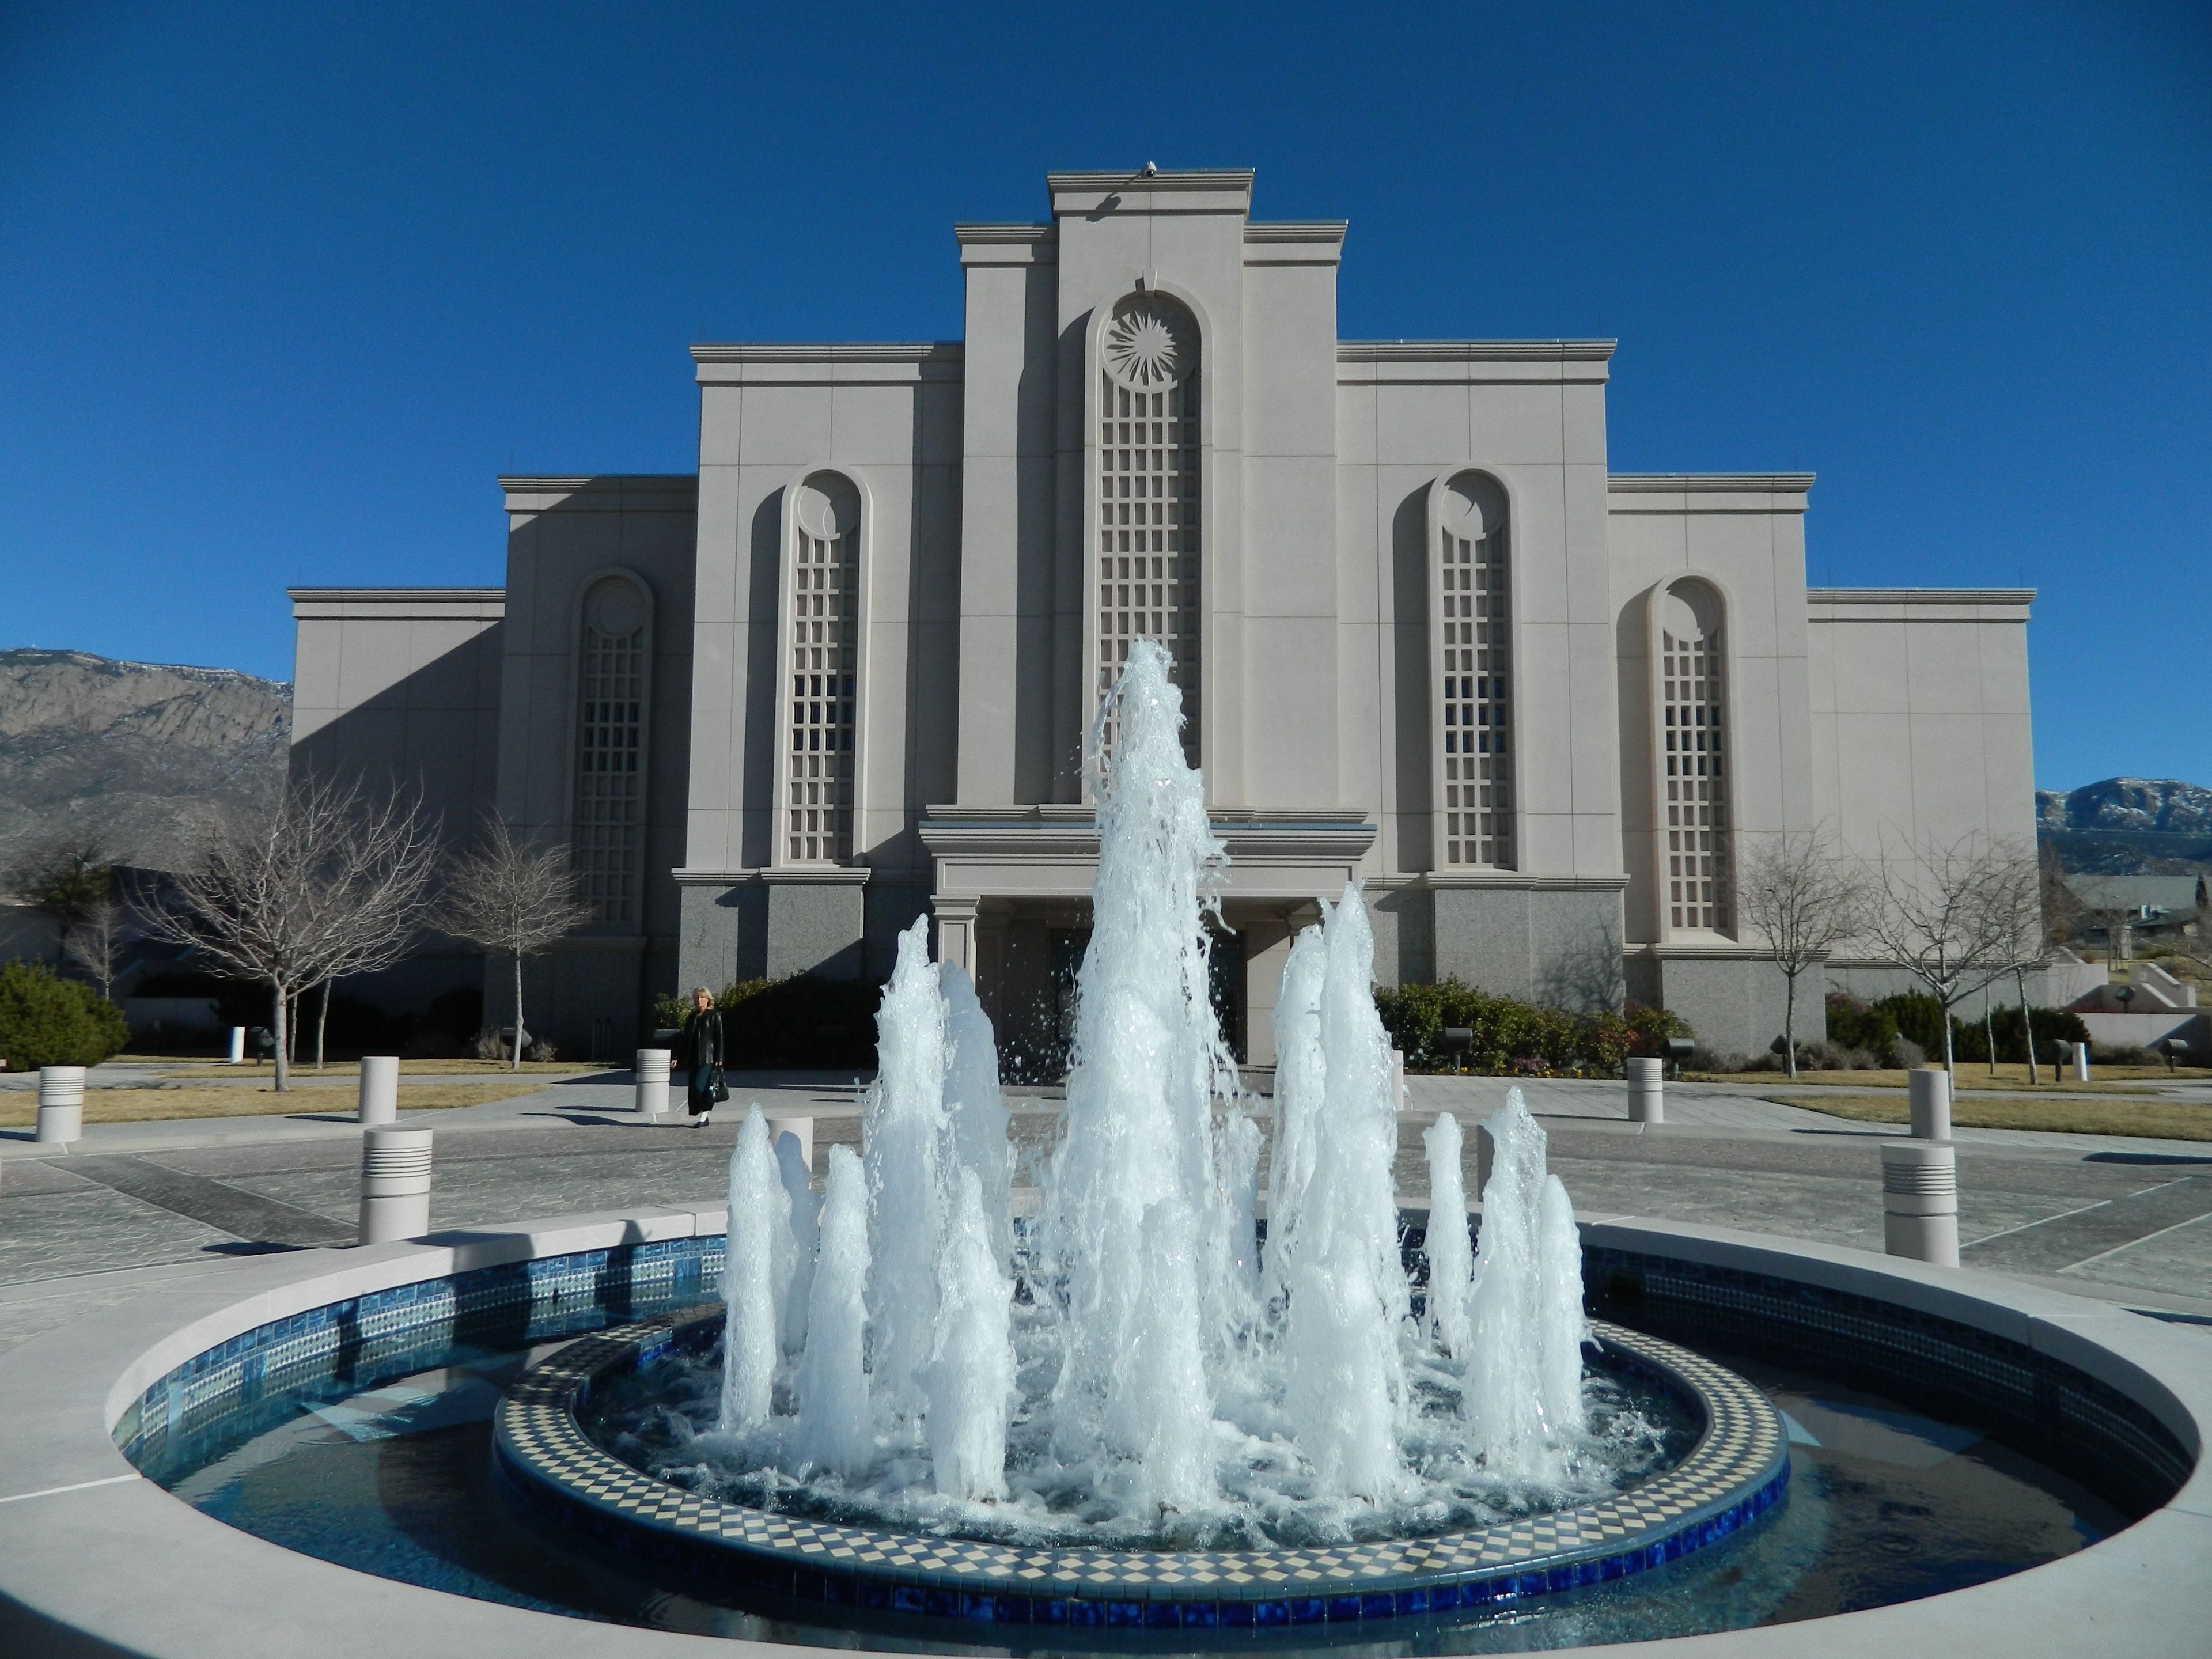 In front of the Albuquerque New Mexico Temple is a large fountain.